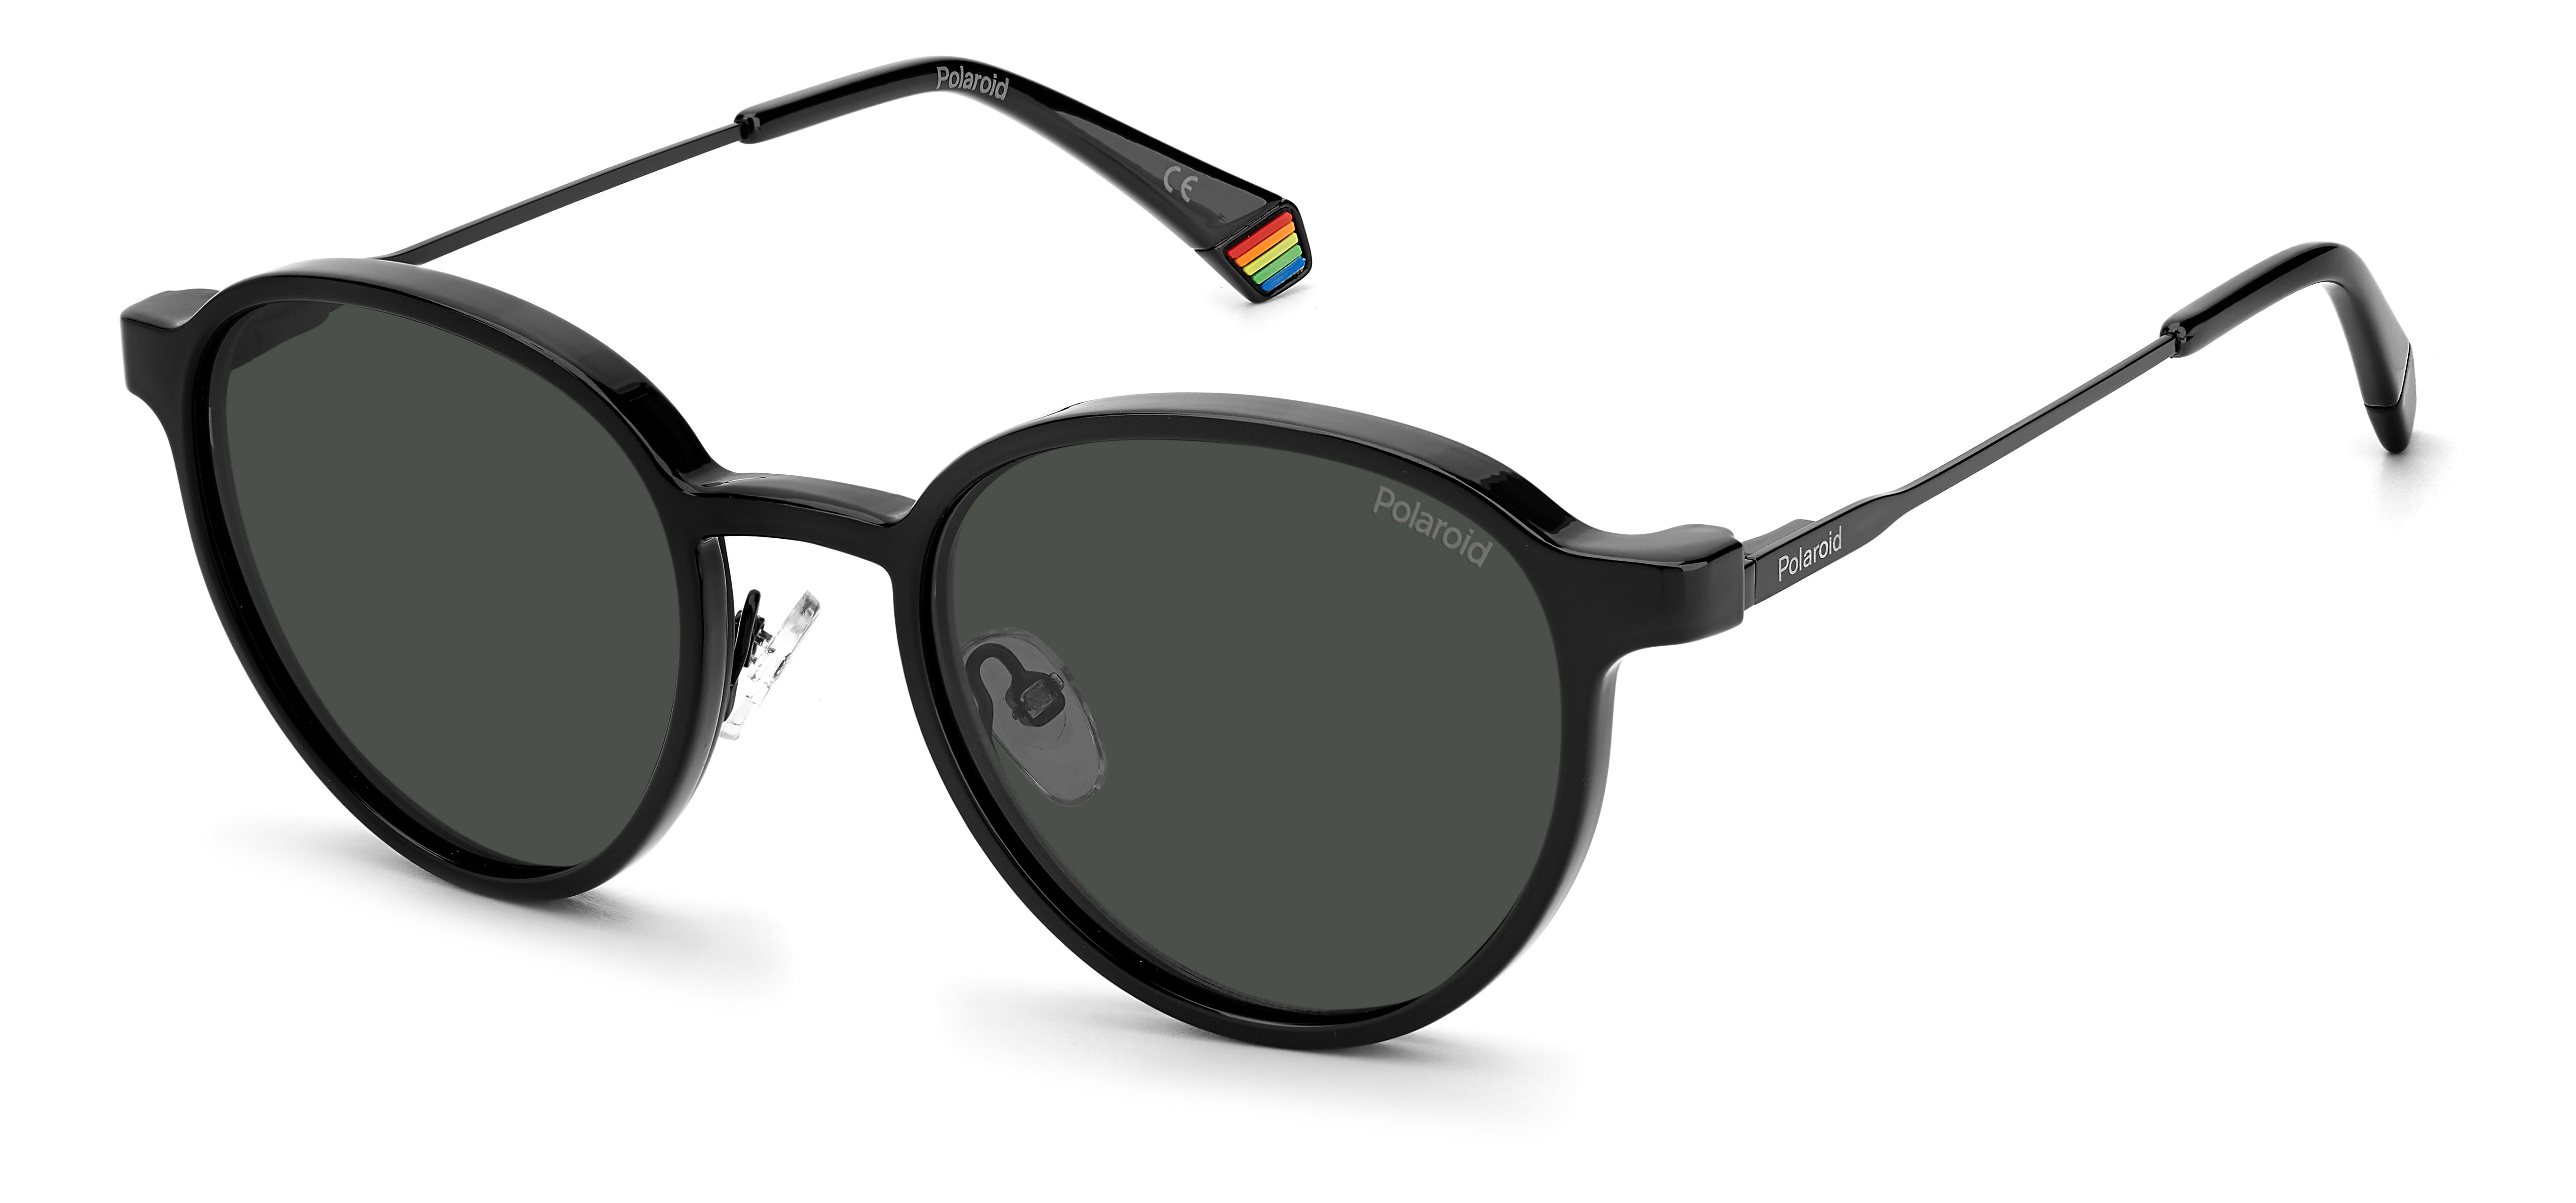 Polaroid Opticals Glasses with Clip-On Sunglasses